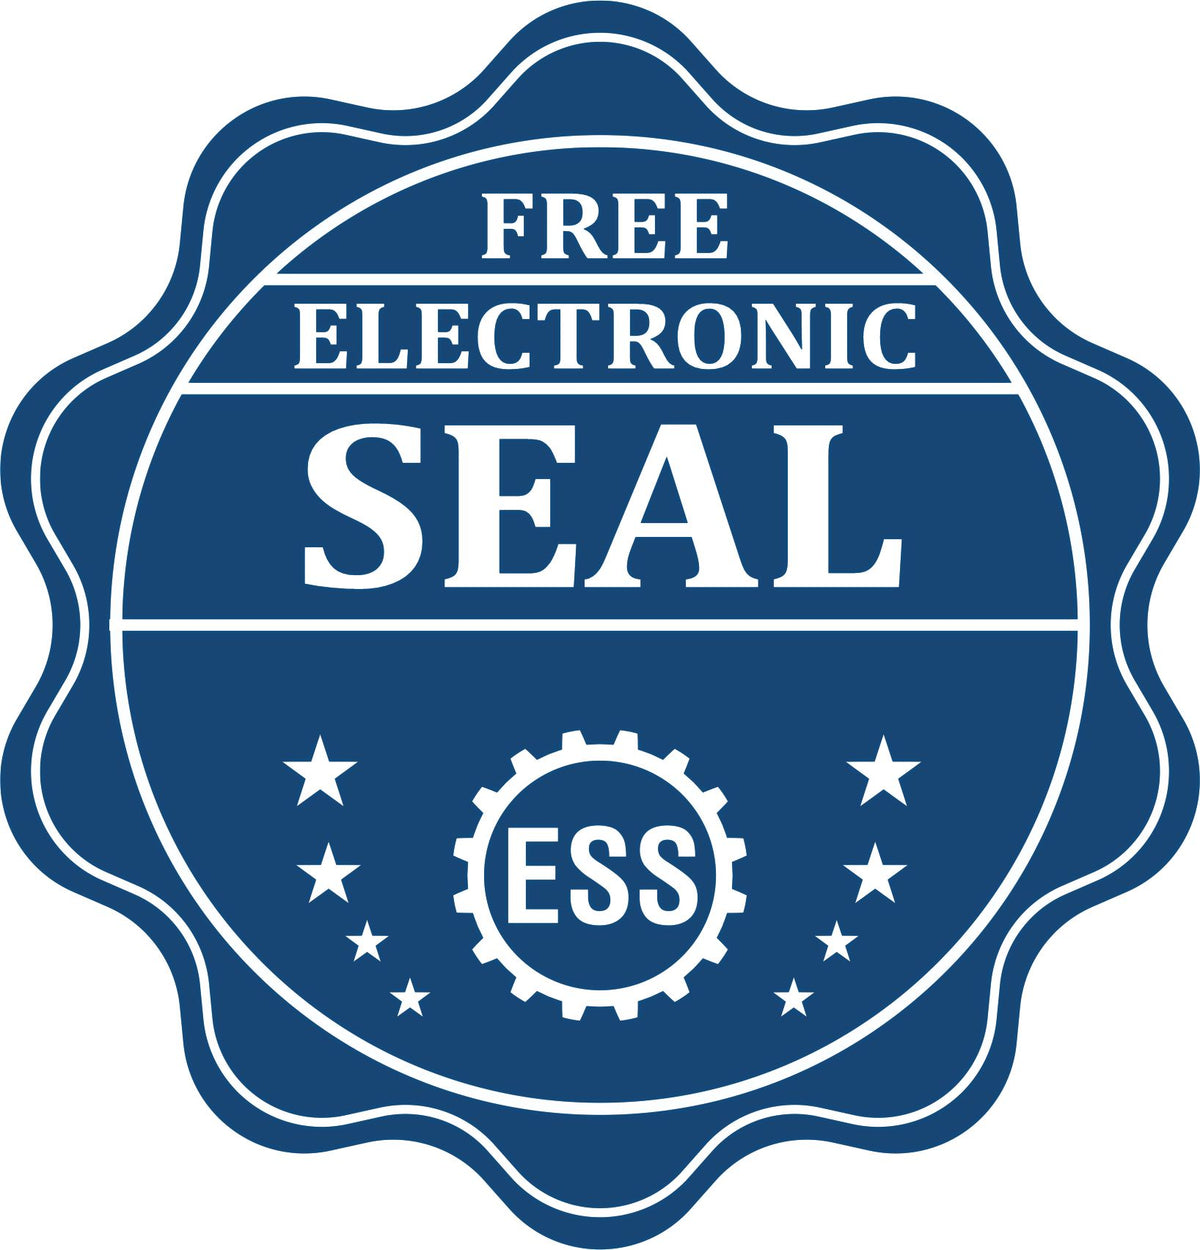 A badge showing a free electronic seal for the State of Florida Soft Land Surveyor Embossing Seal with stars and the ESS gear on the emblem.